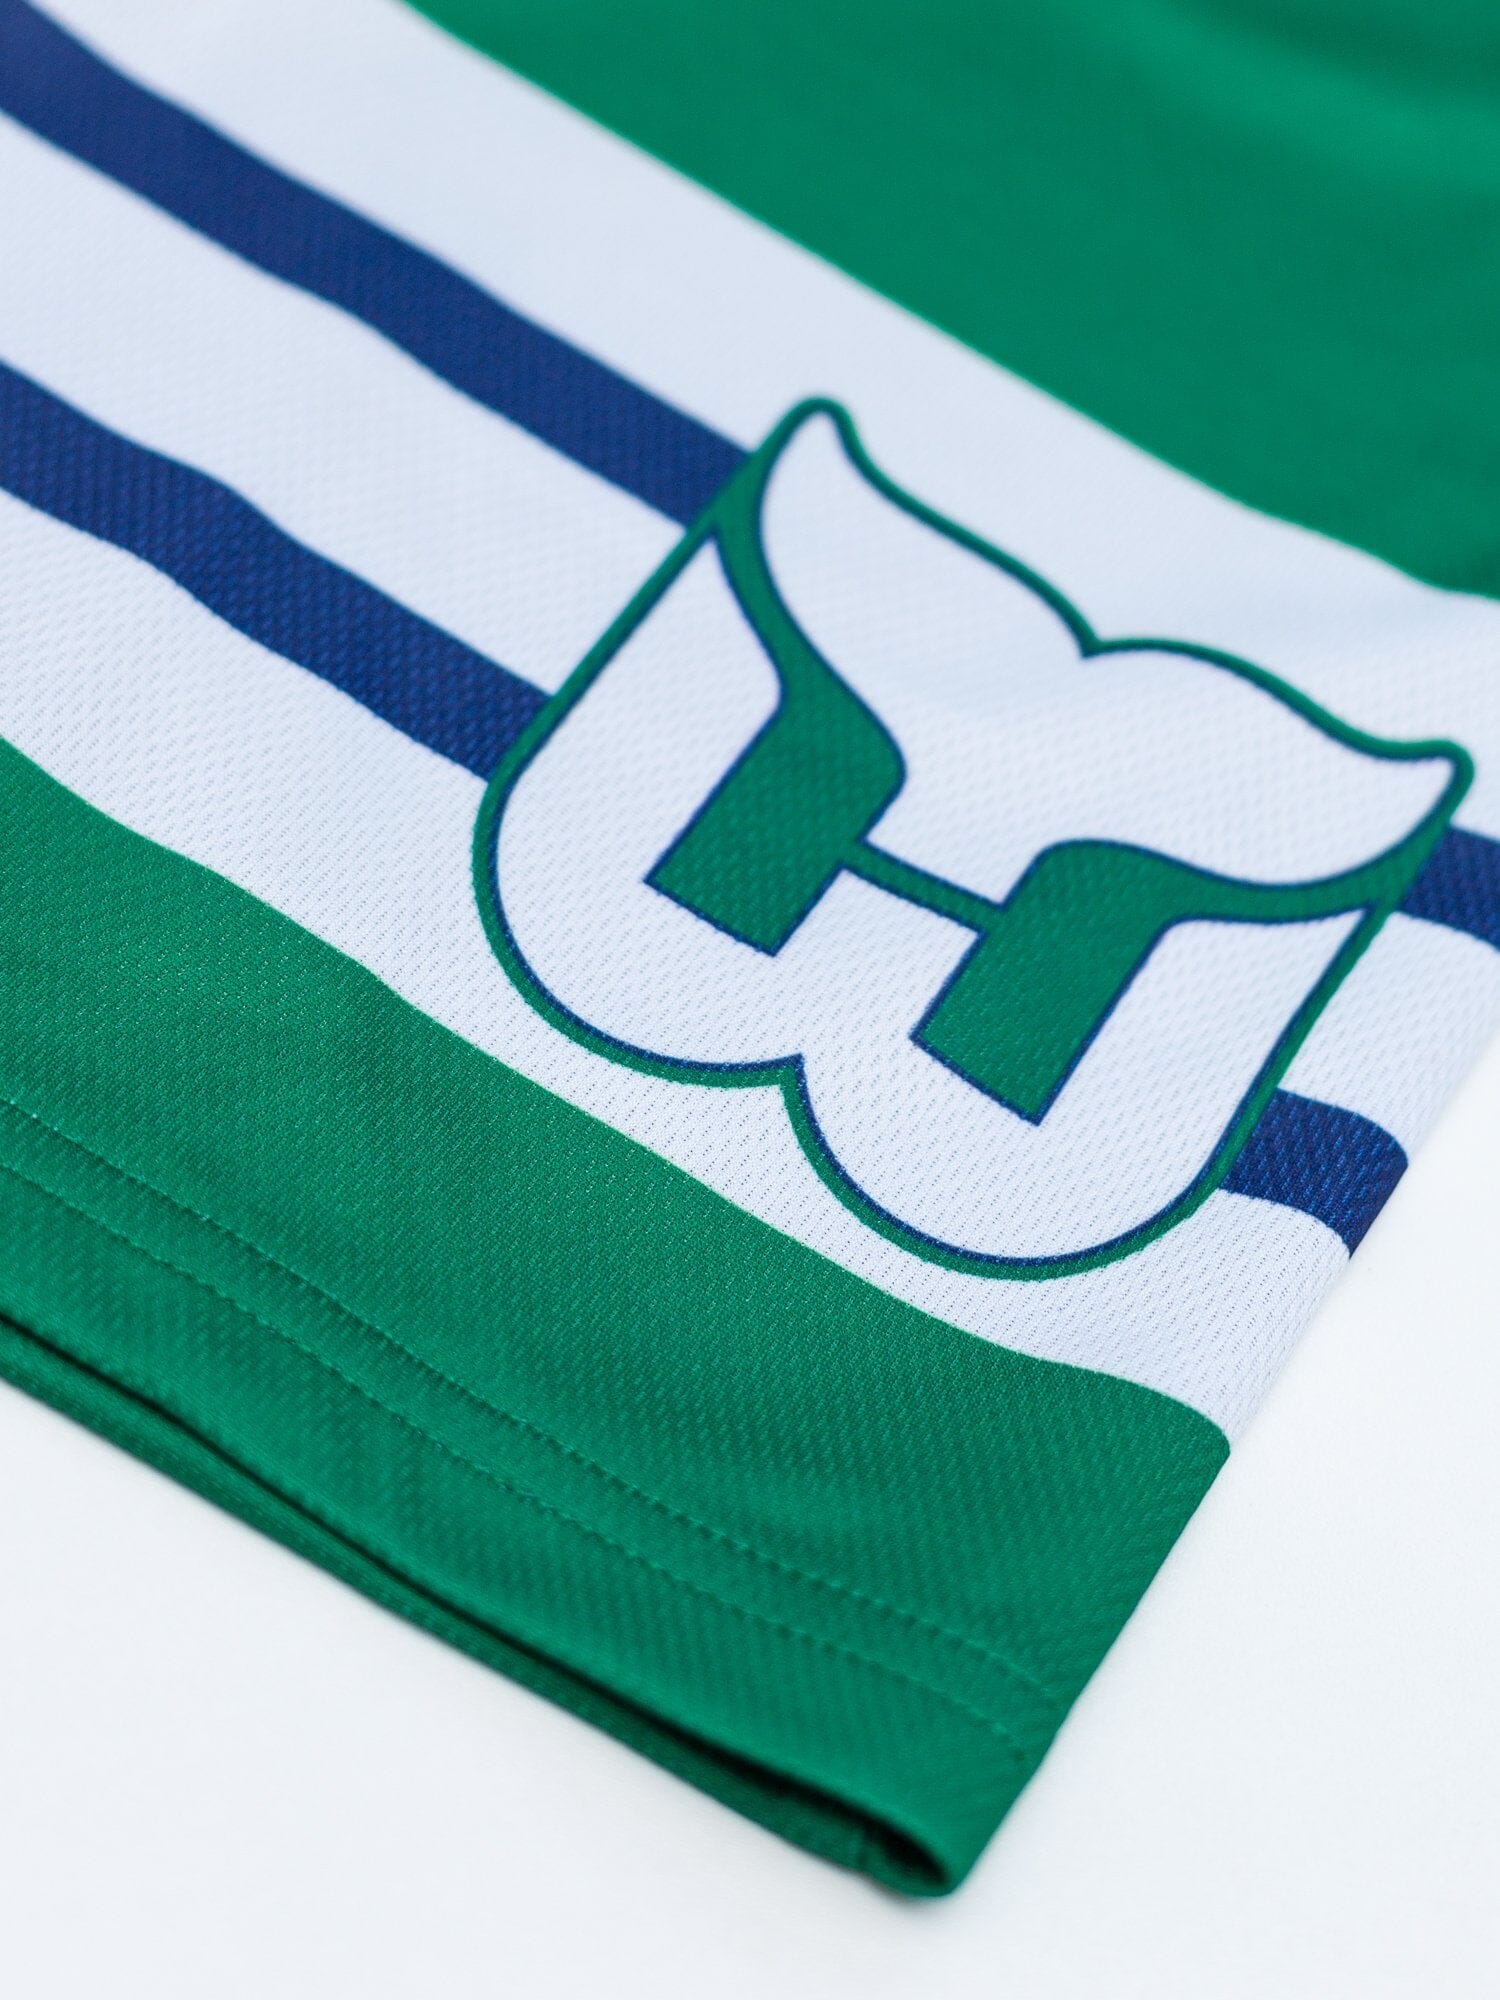 Archive 400 – Hartford Whalers